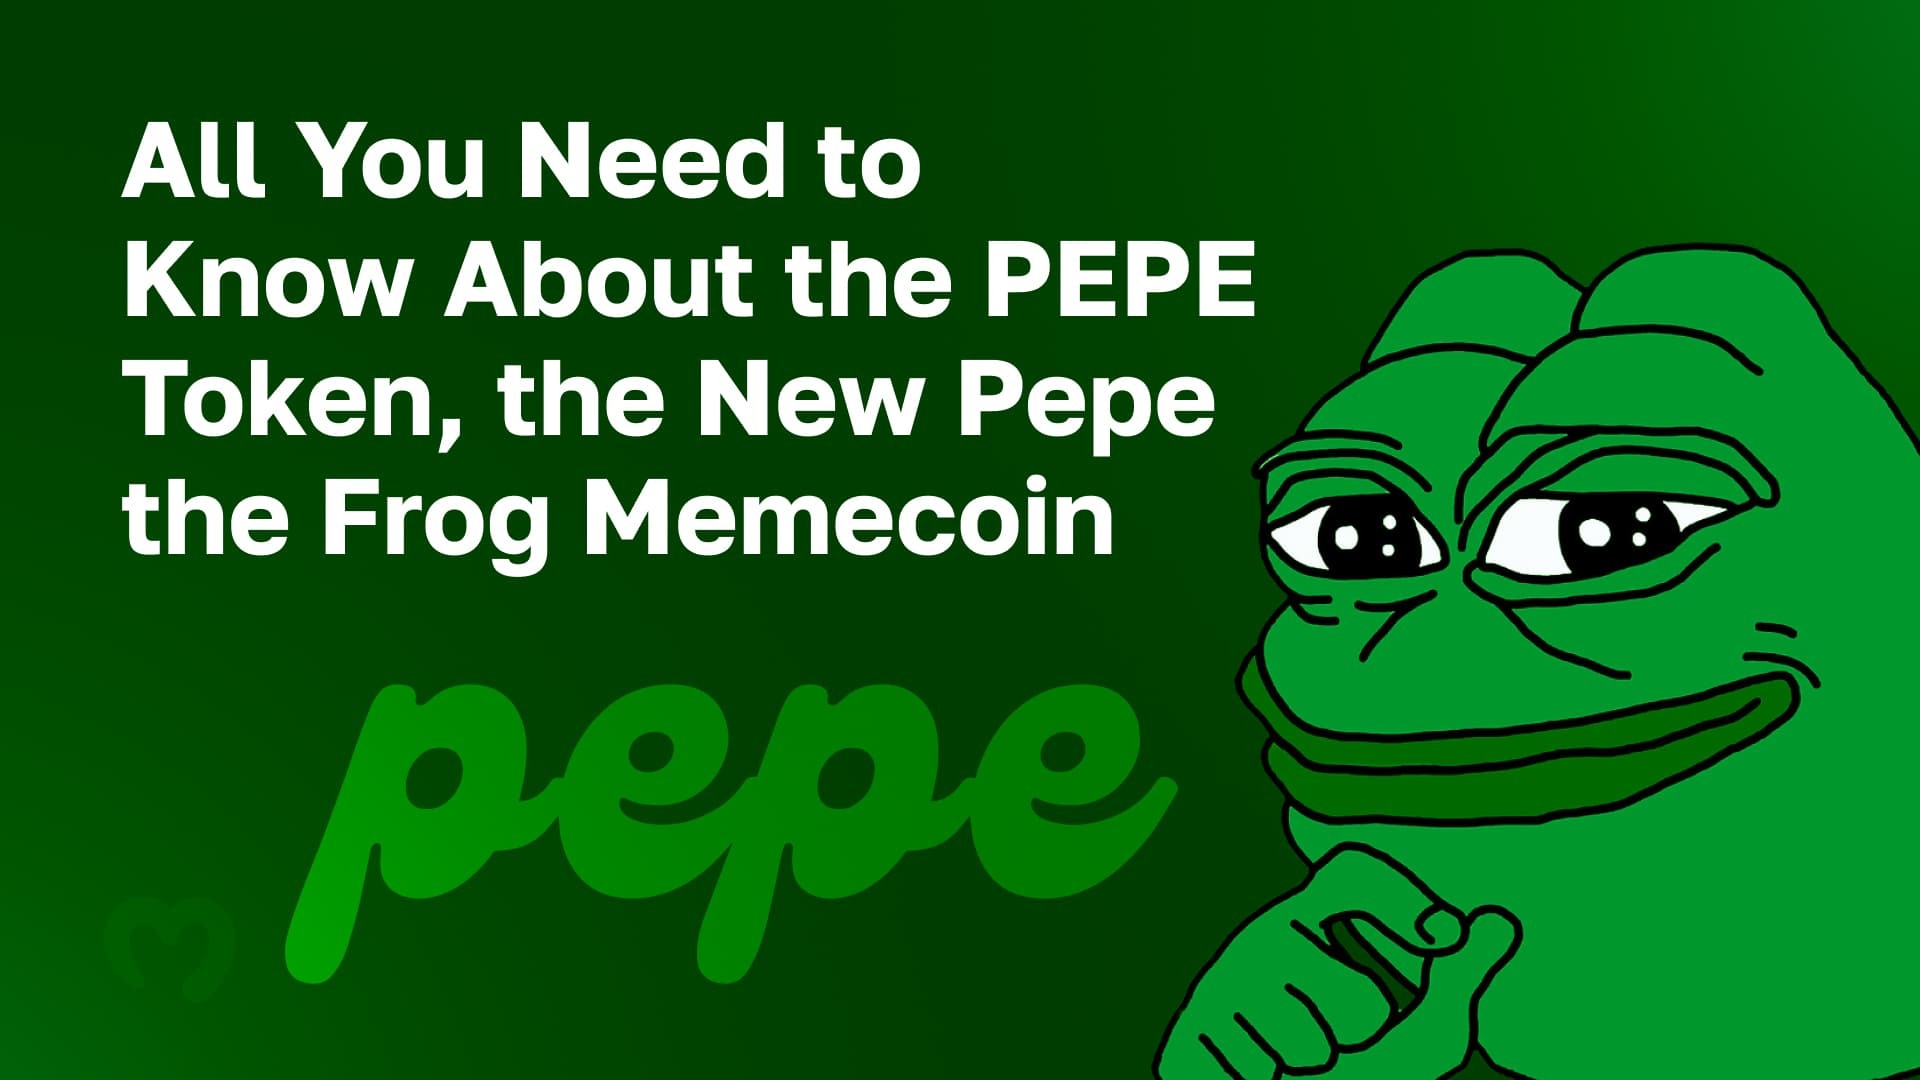 All You Need to Know About the PEPE Token, the New Pepe the Frog Memecoin